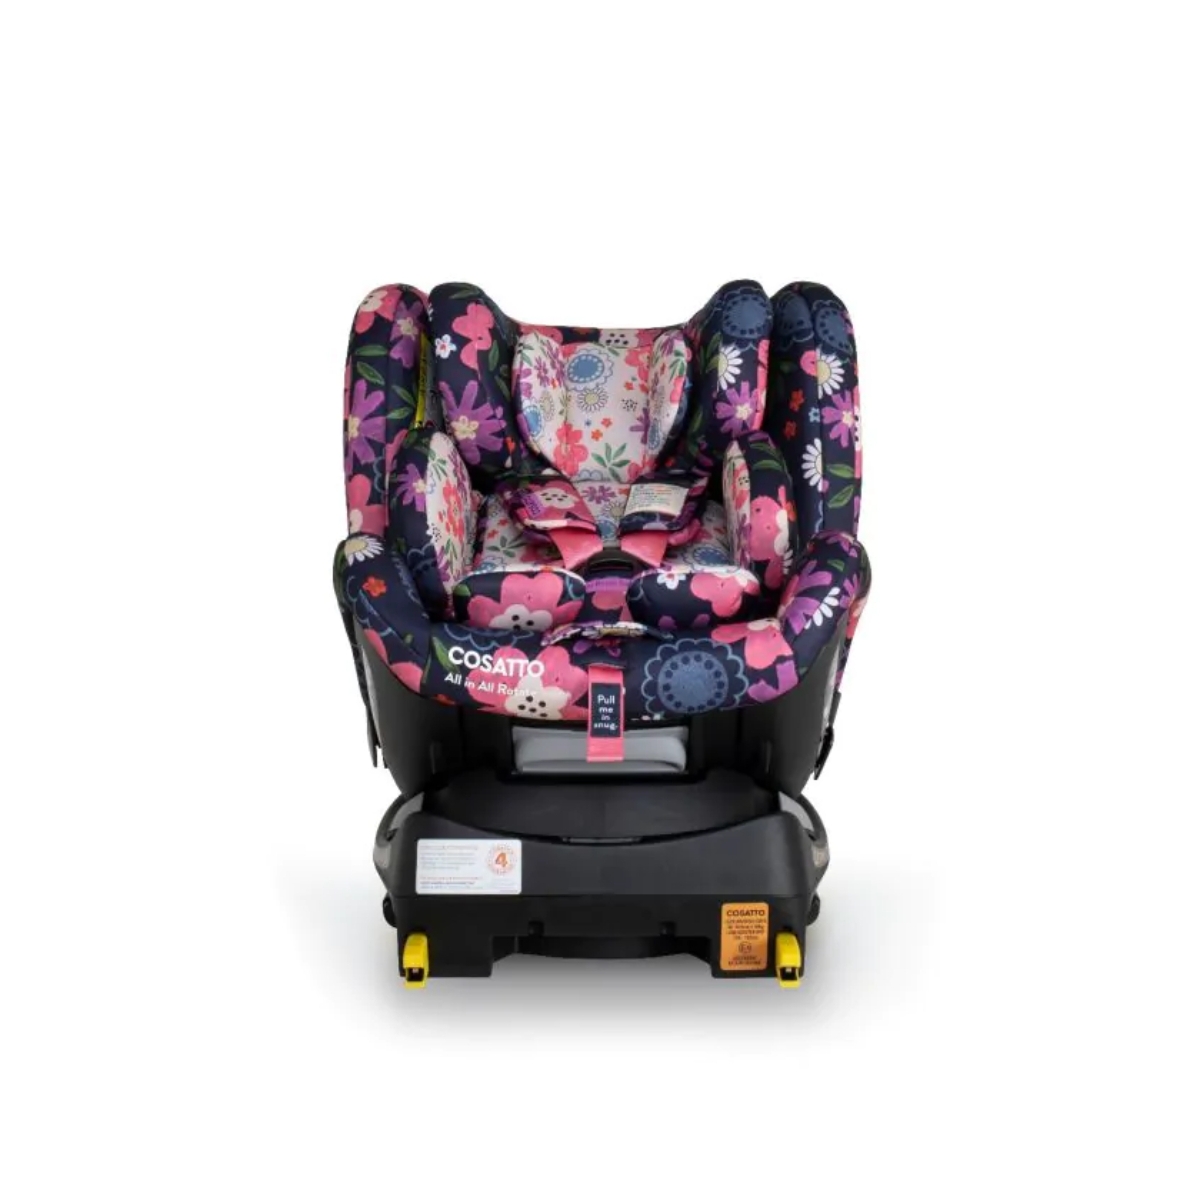 Cosatto All In All Rotate i-Size Group 0+123 Car Seat